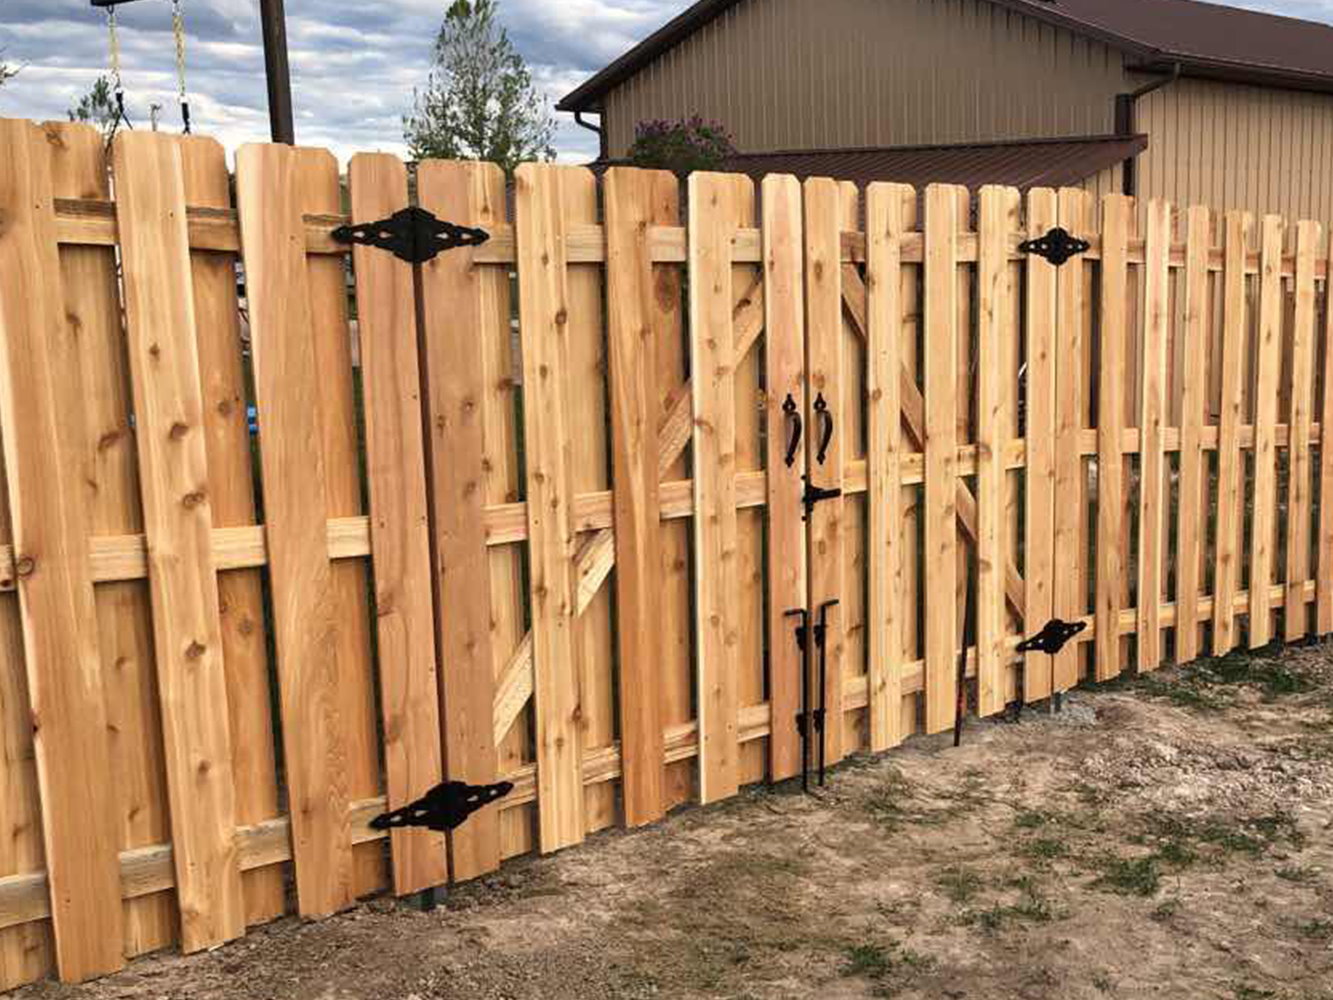 Pinedale WY Shadowbox style wood fence